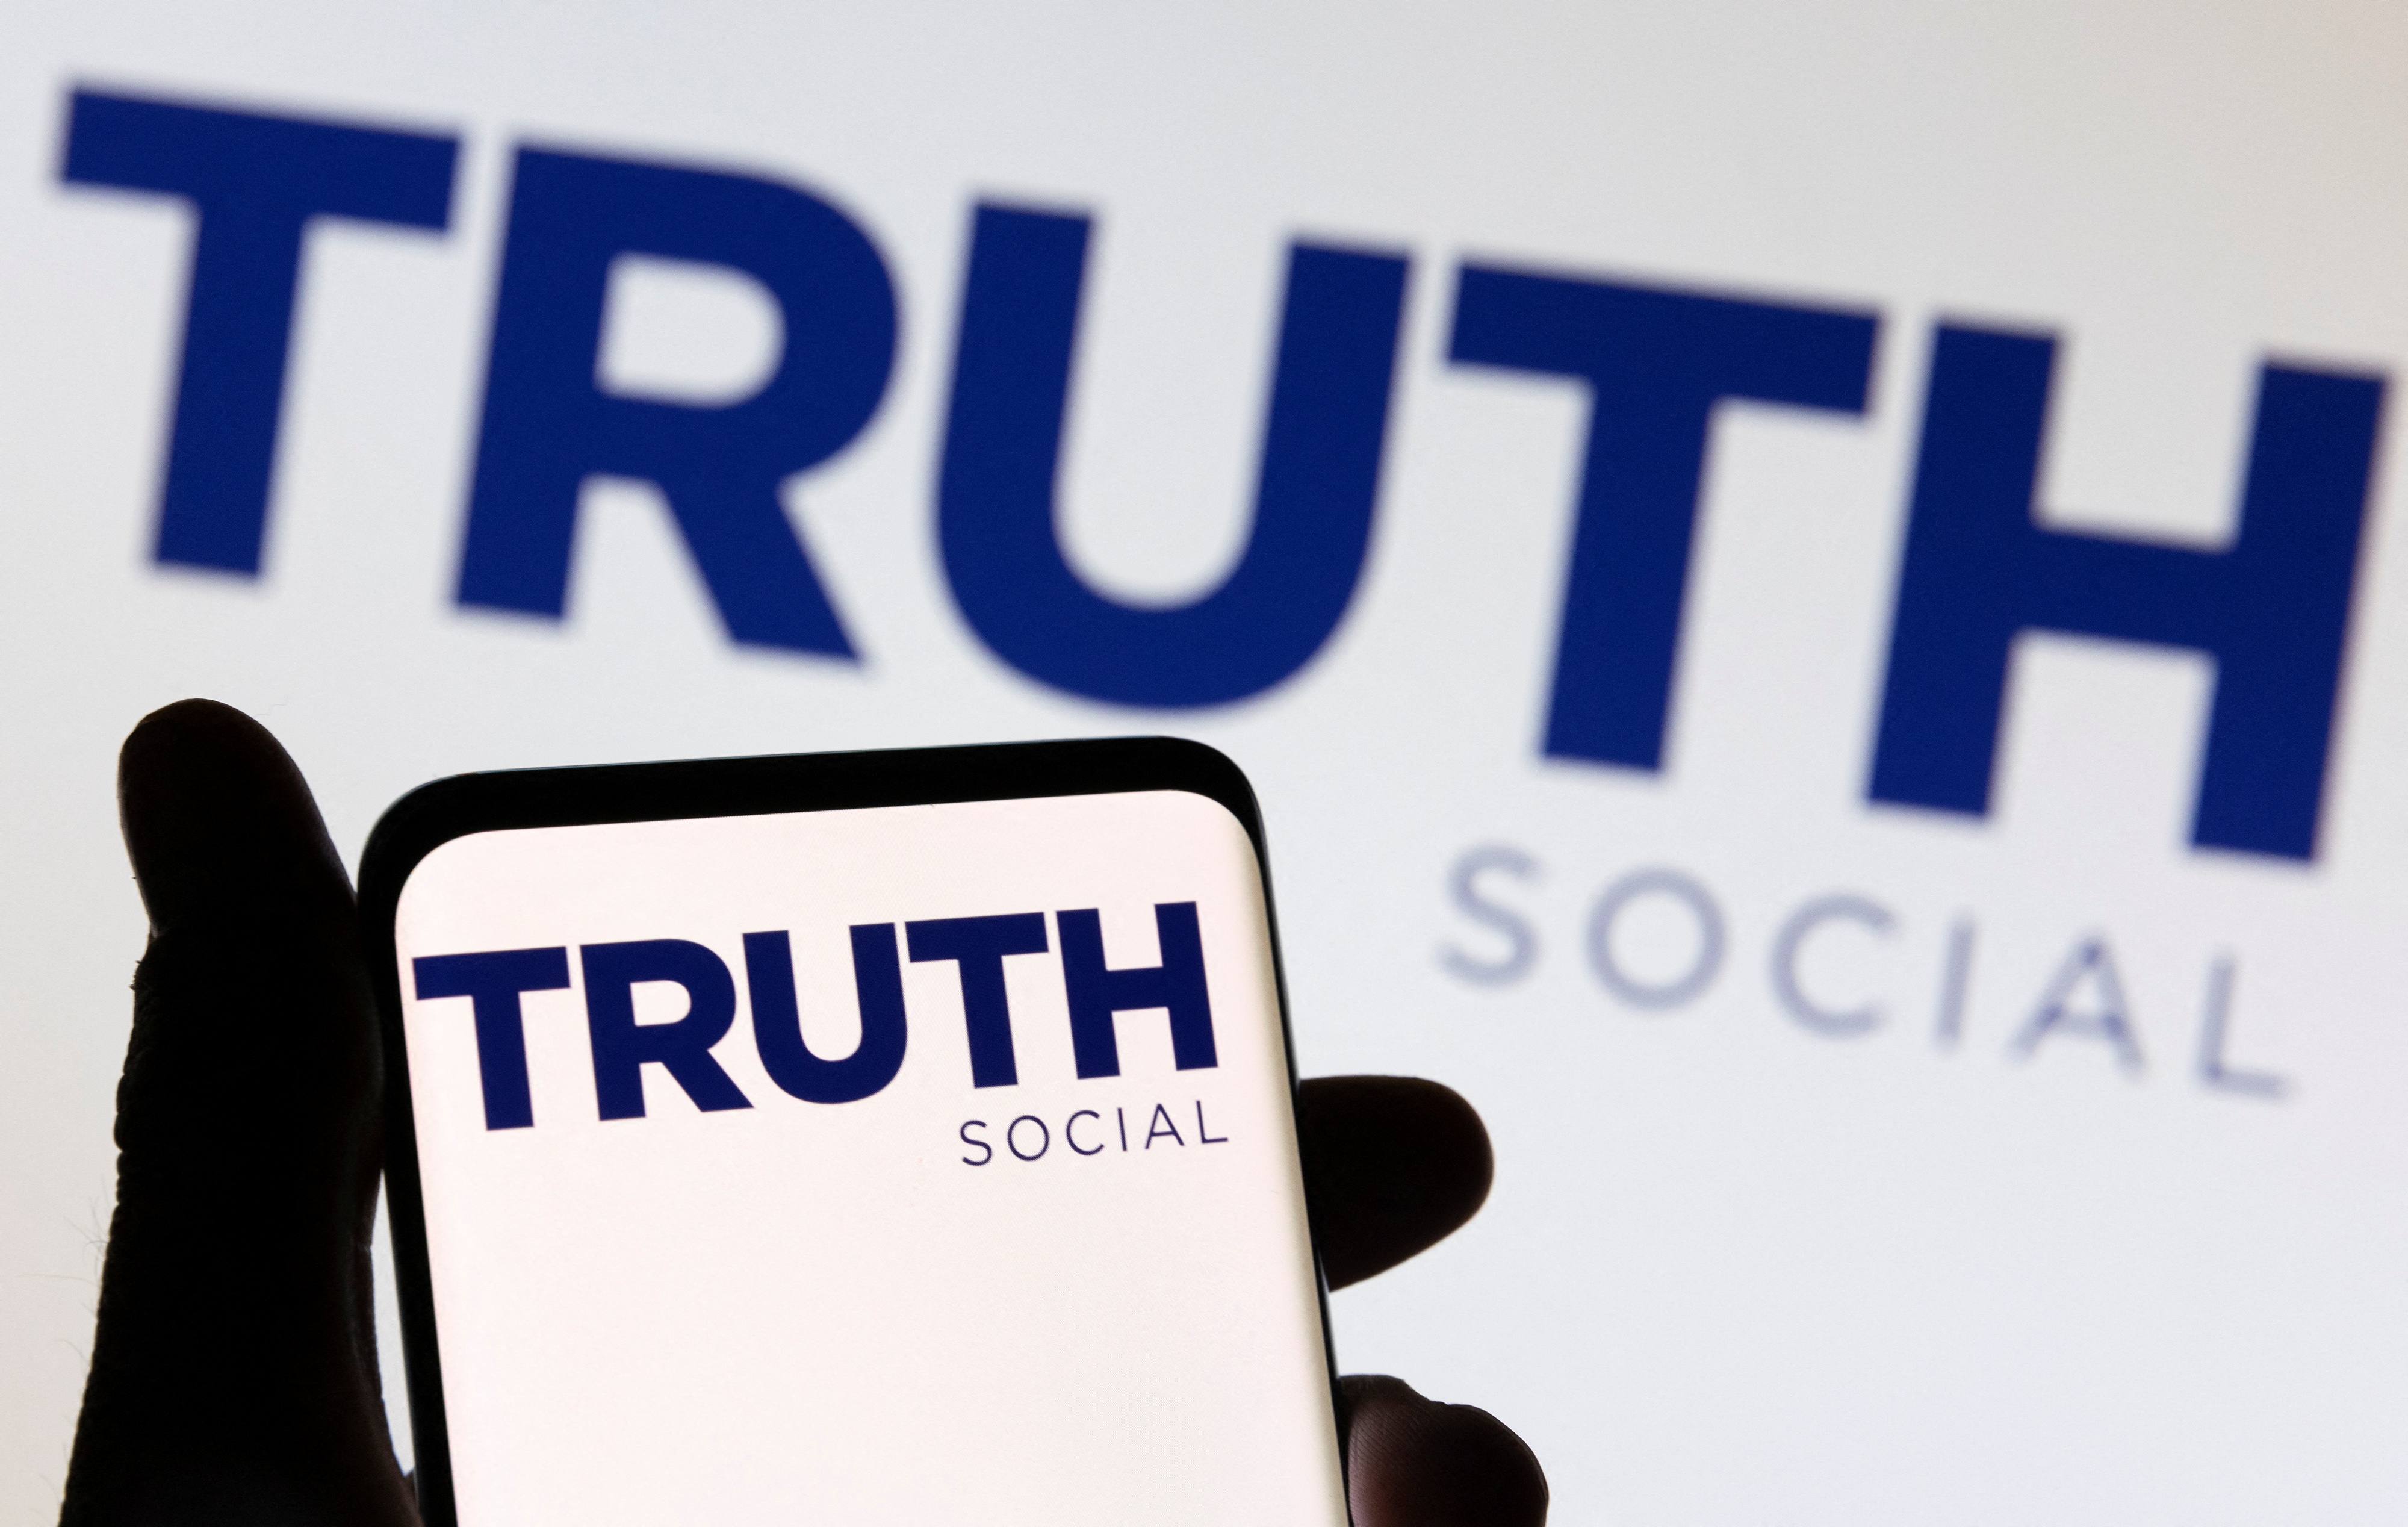 The Truth social network logo is seen displayed in this picture illustration taken February 21, 2022. REUTERS/Dado Ruvic/Illustration